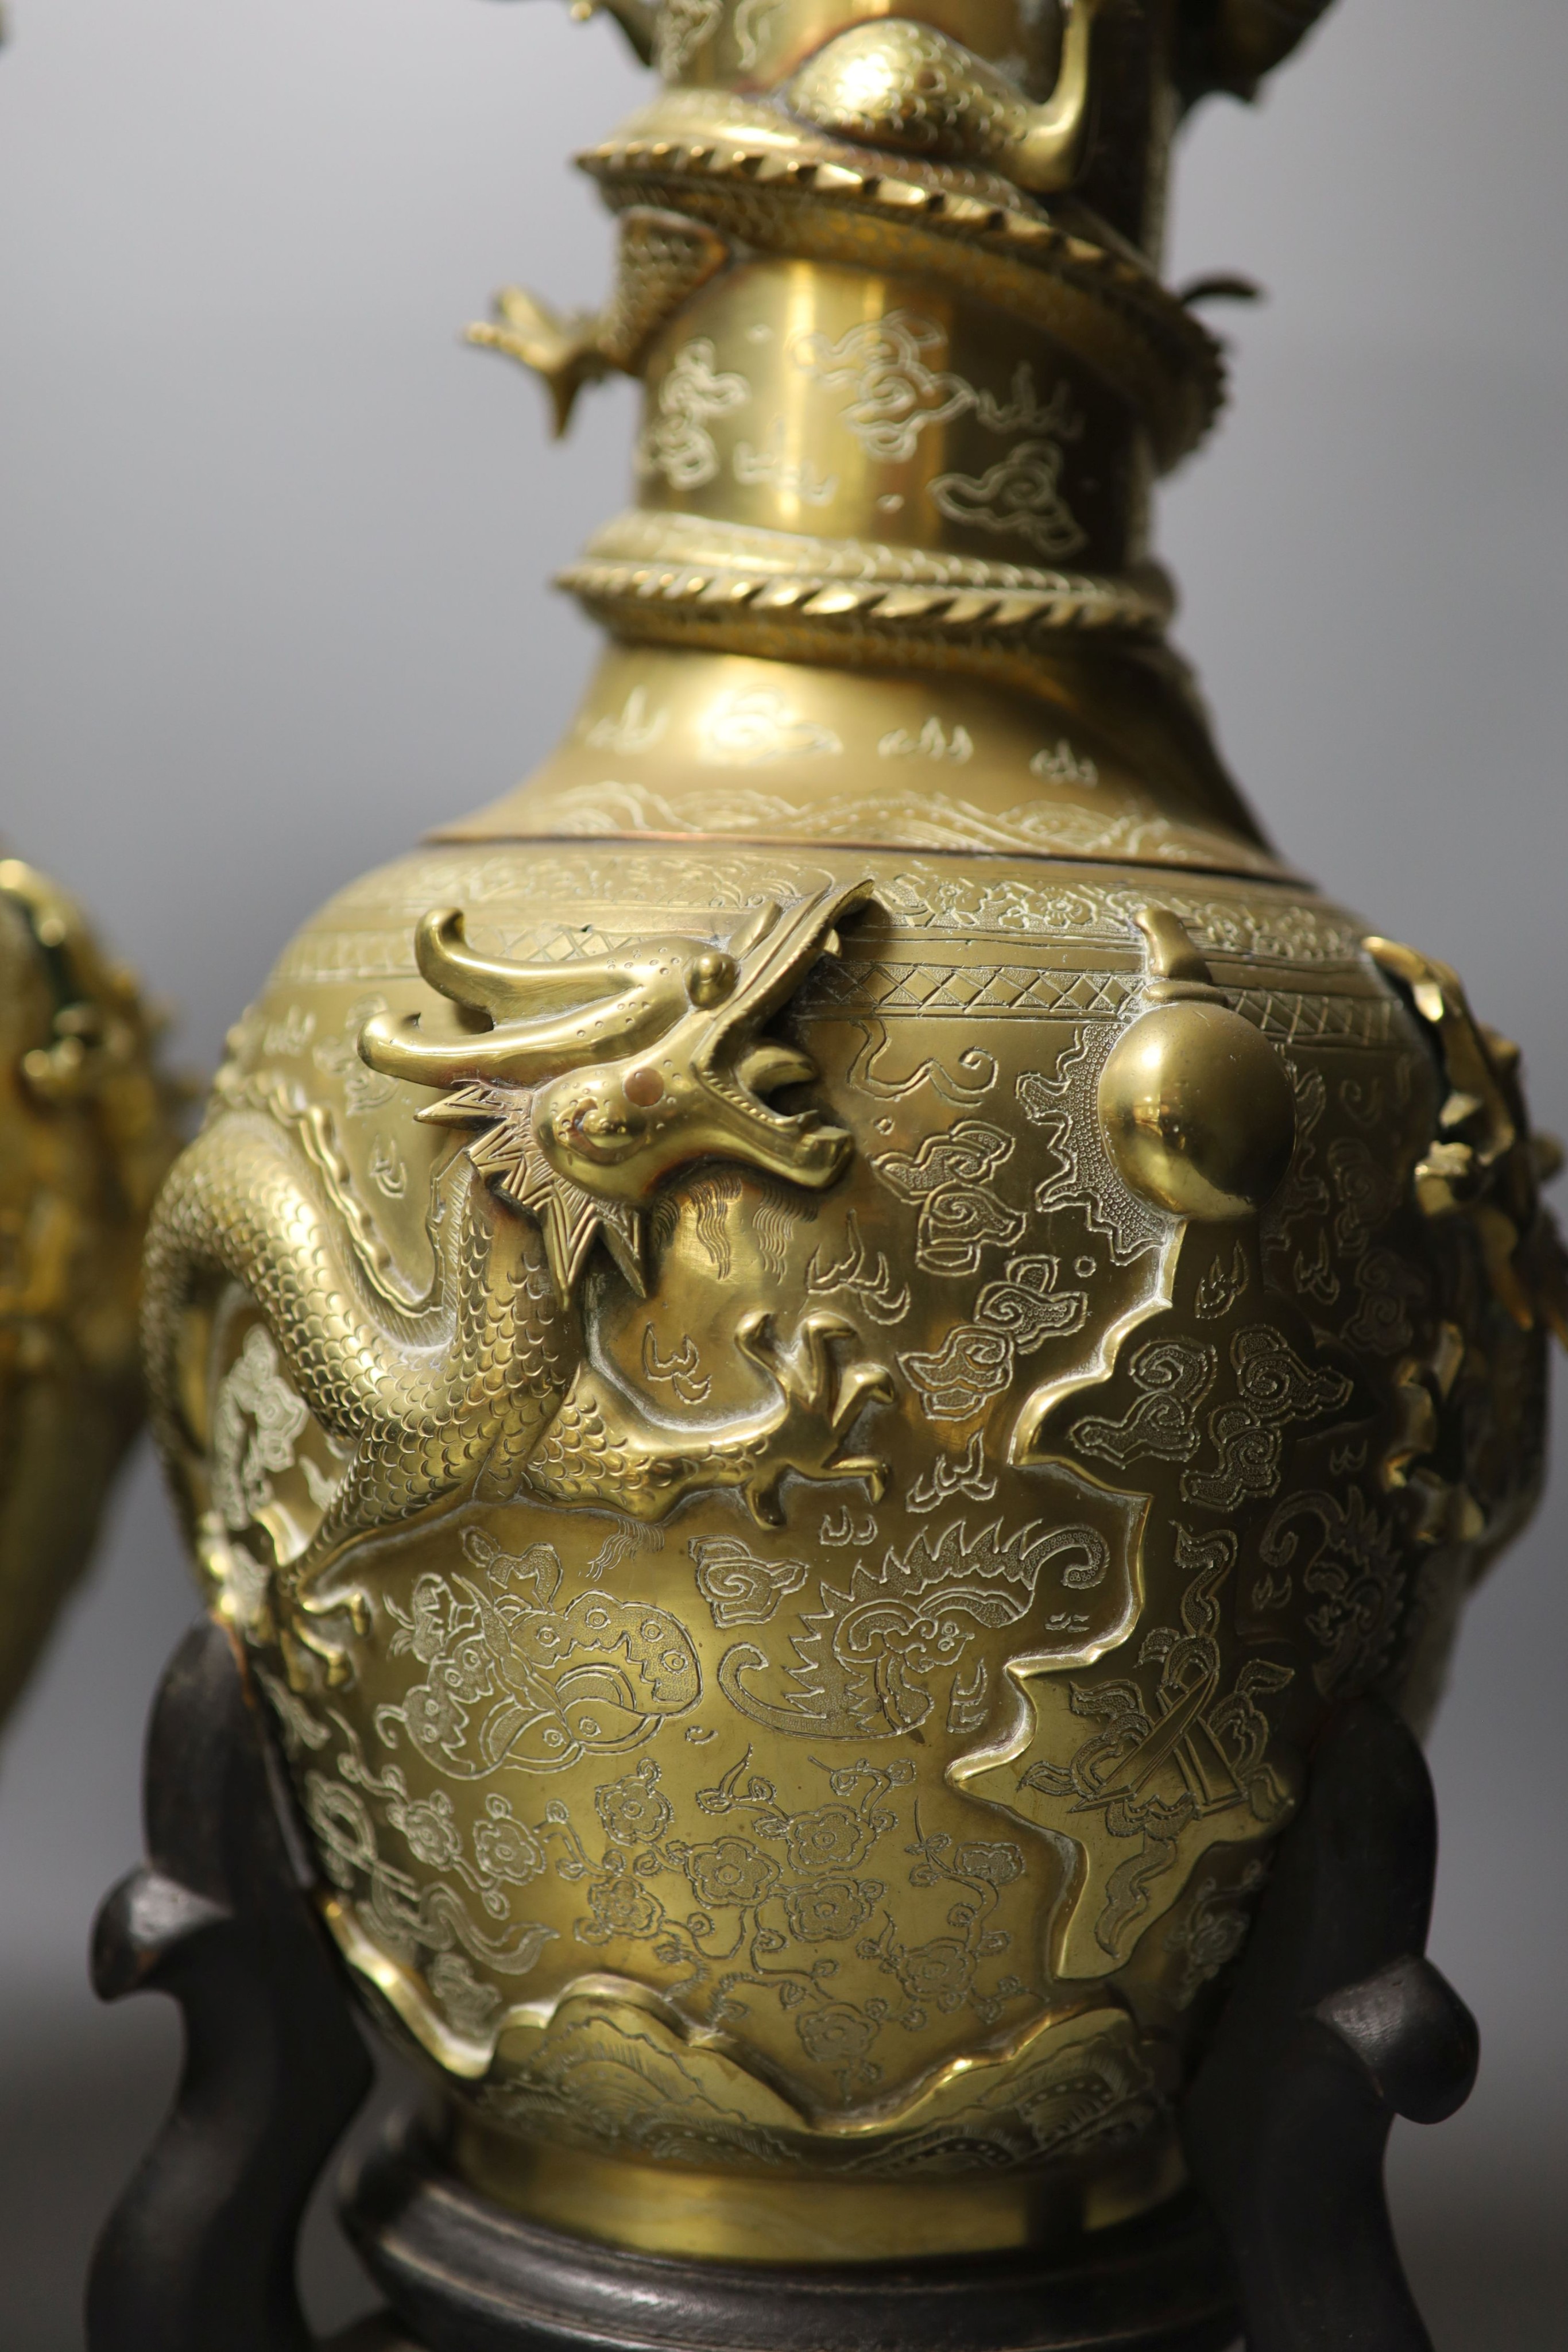 A pair of large Chinese bronze vases on stands, 45.5 cms high including stands